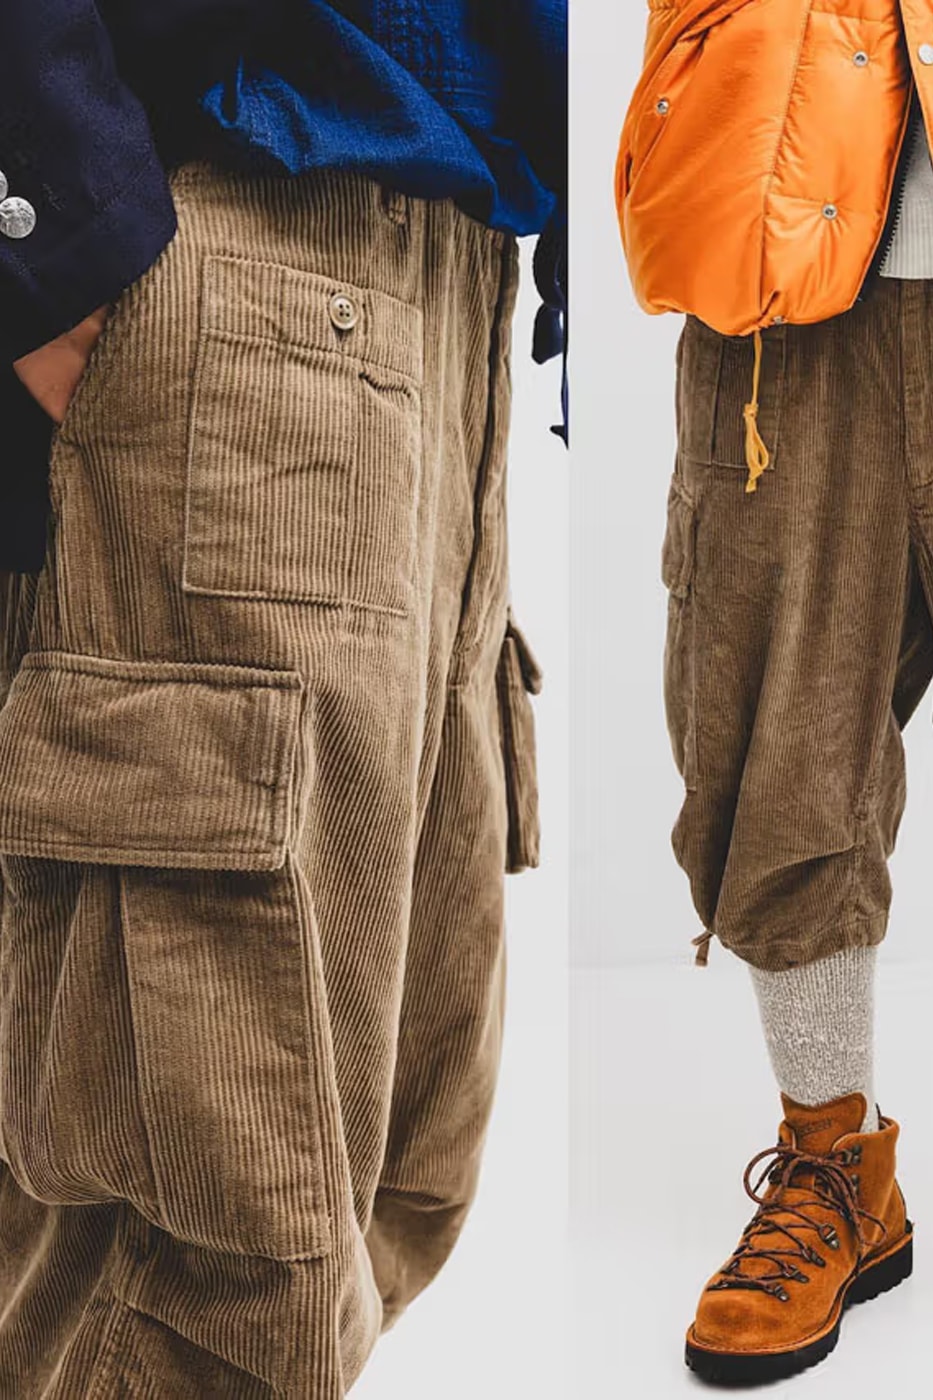 BEAMS PLUS and Engineered Garments Deliver Pocket-Packed Corduroy Shorts